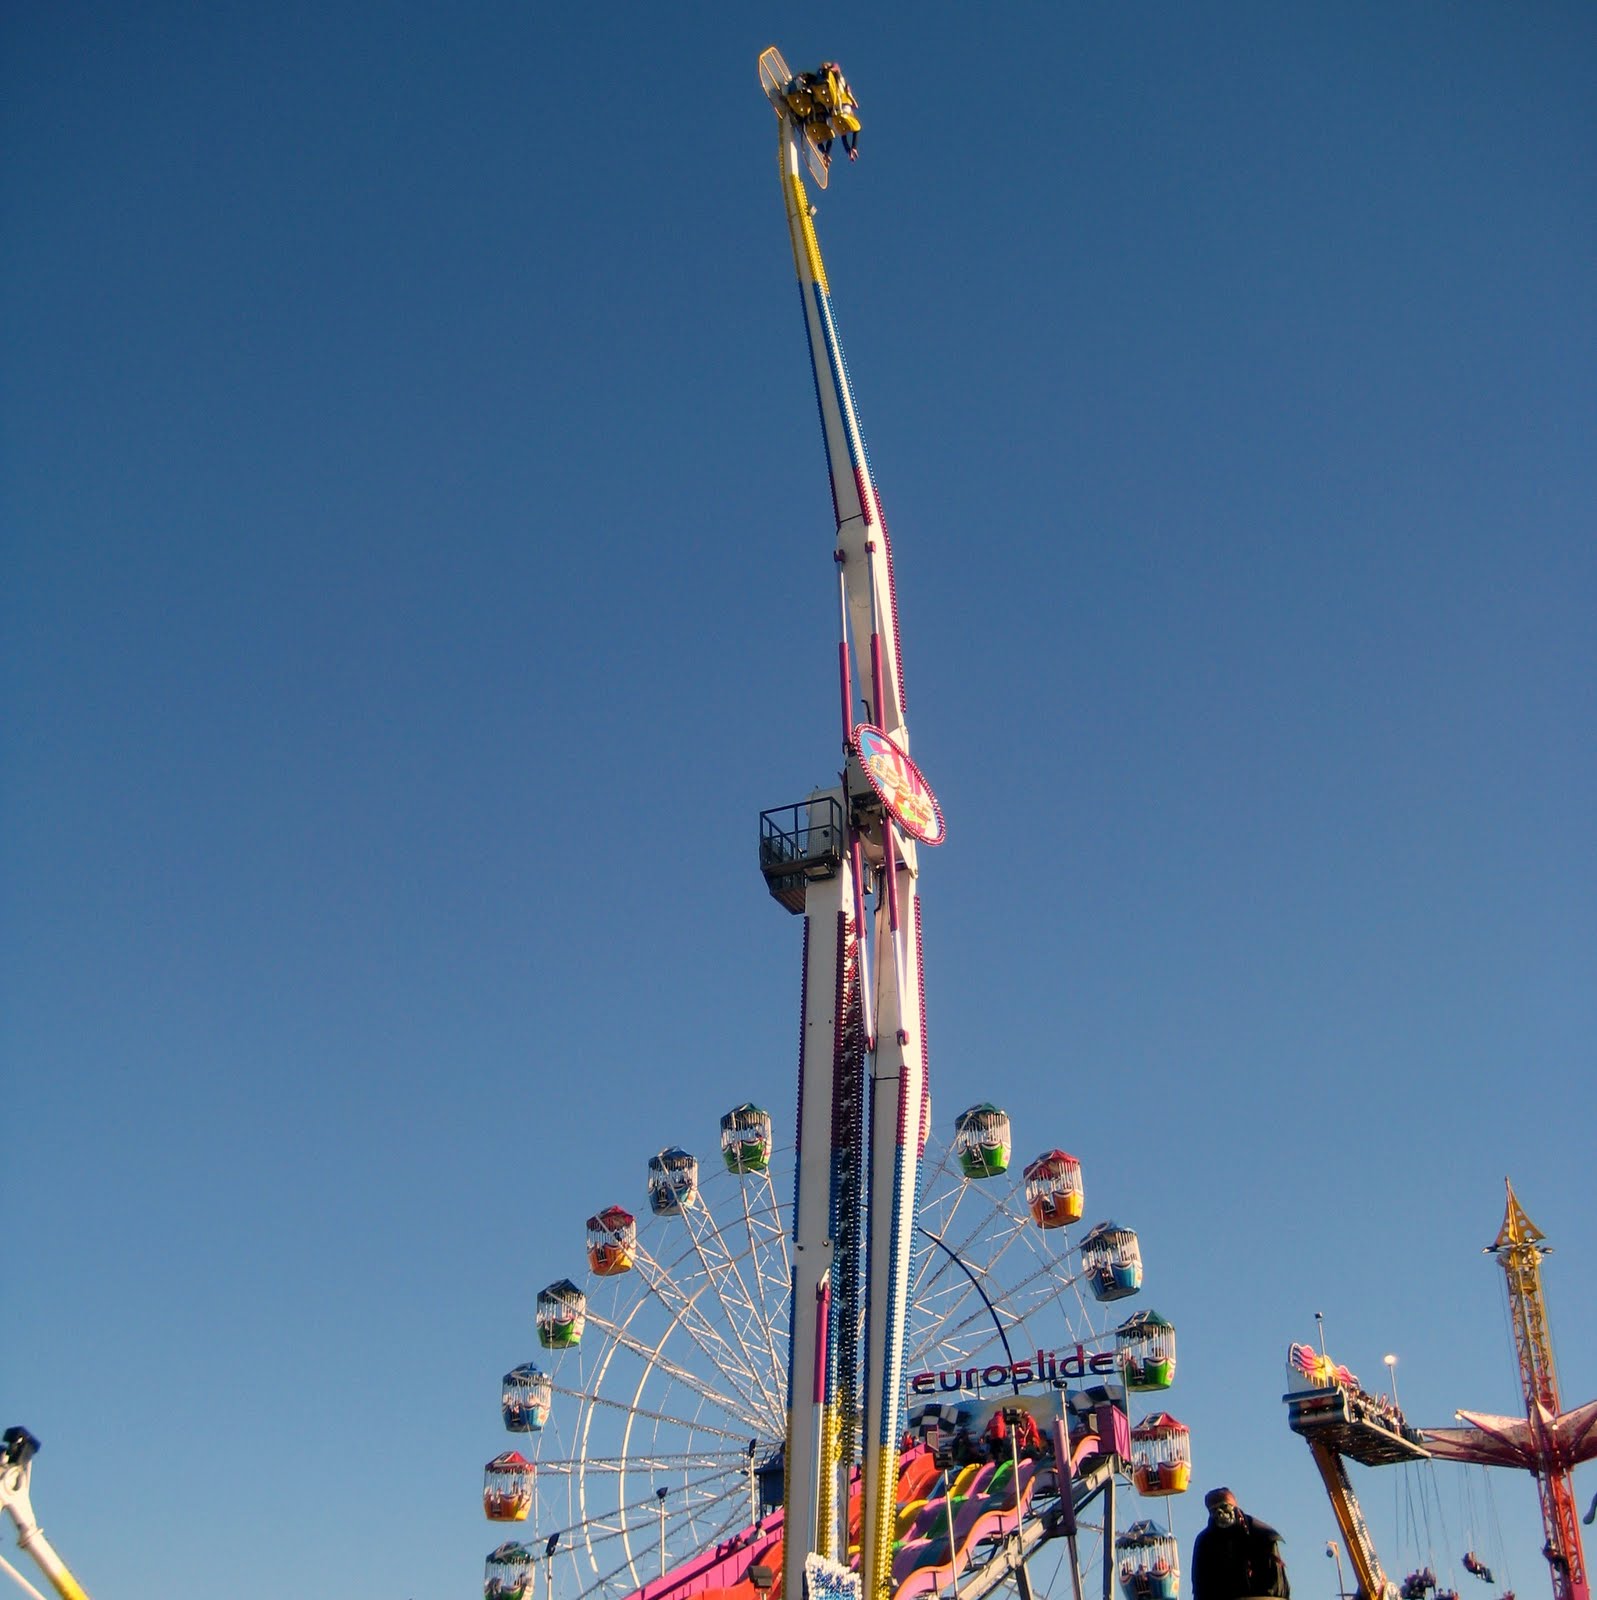 Ekka Rides Prices & Passes | How Much Are Ekka Rides this Year ...